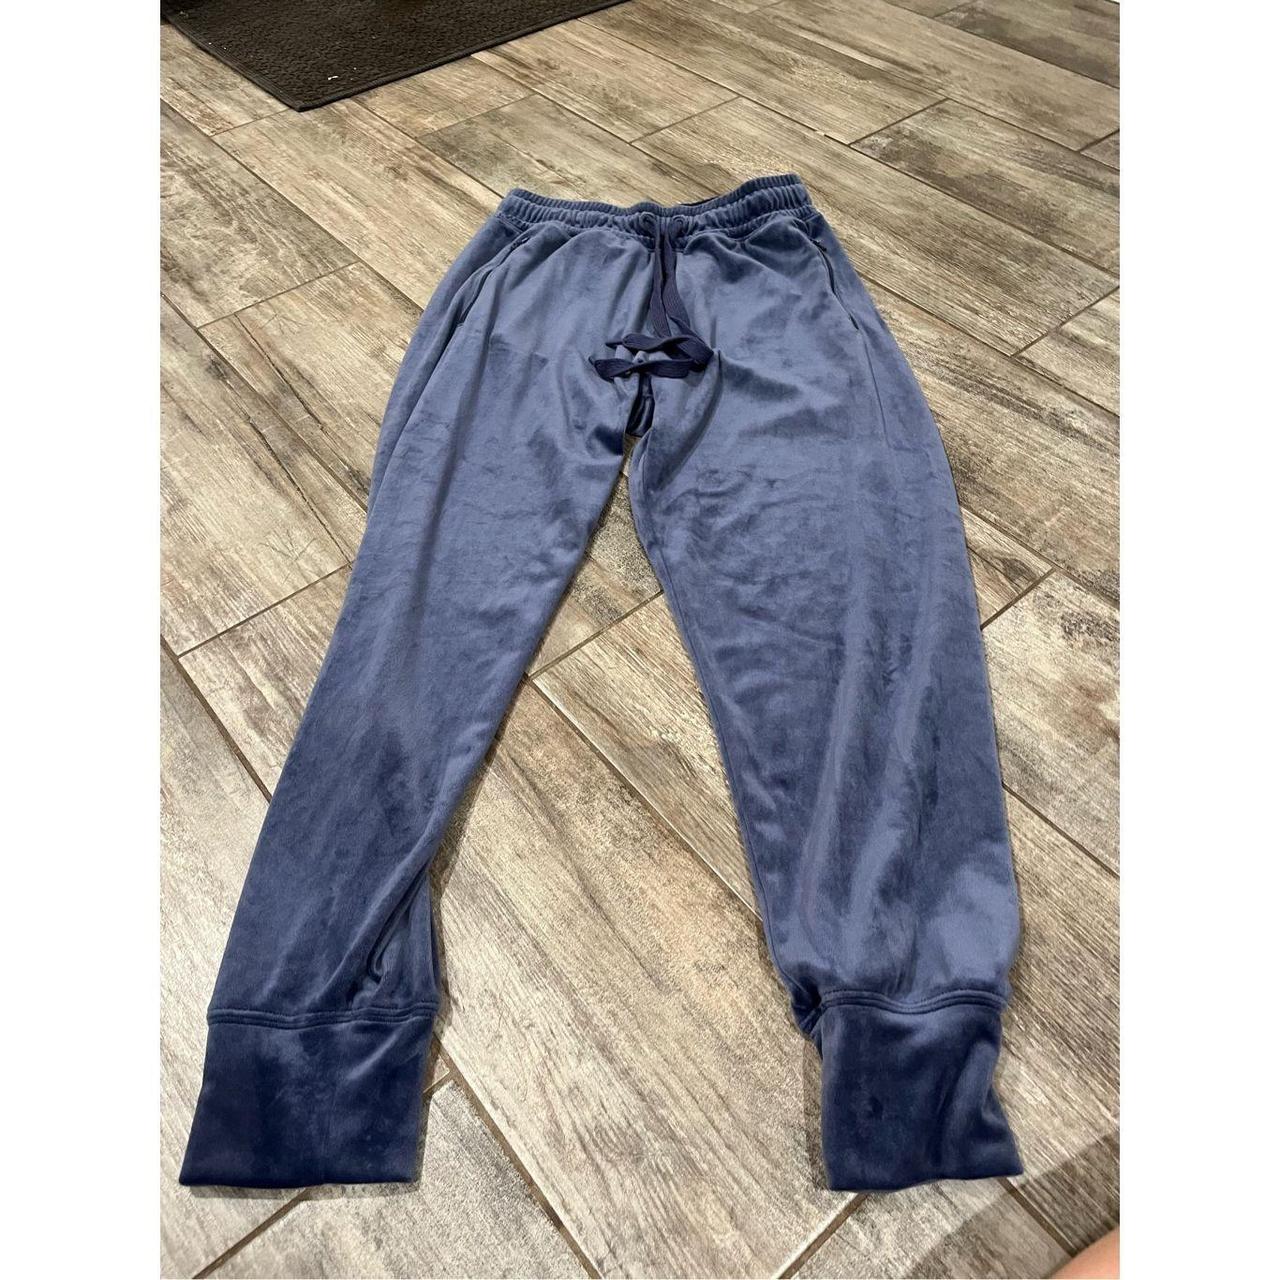 Aerie Real Soft® Foldover Jogger